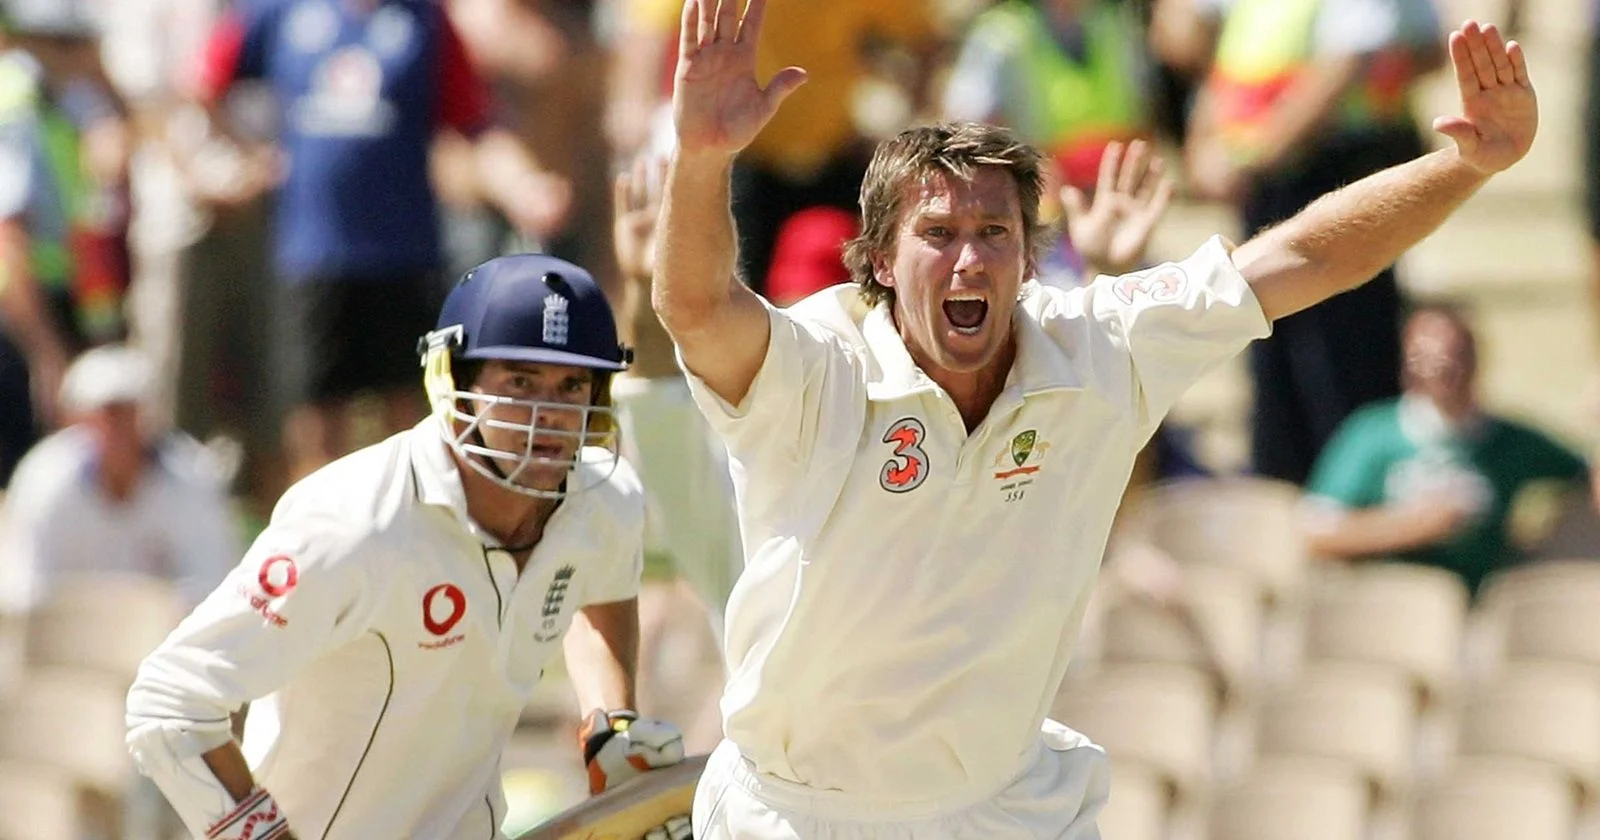 4 Bowlers Who Took A Wicket On The Last Delivery Of Their Test Careers